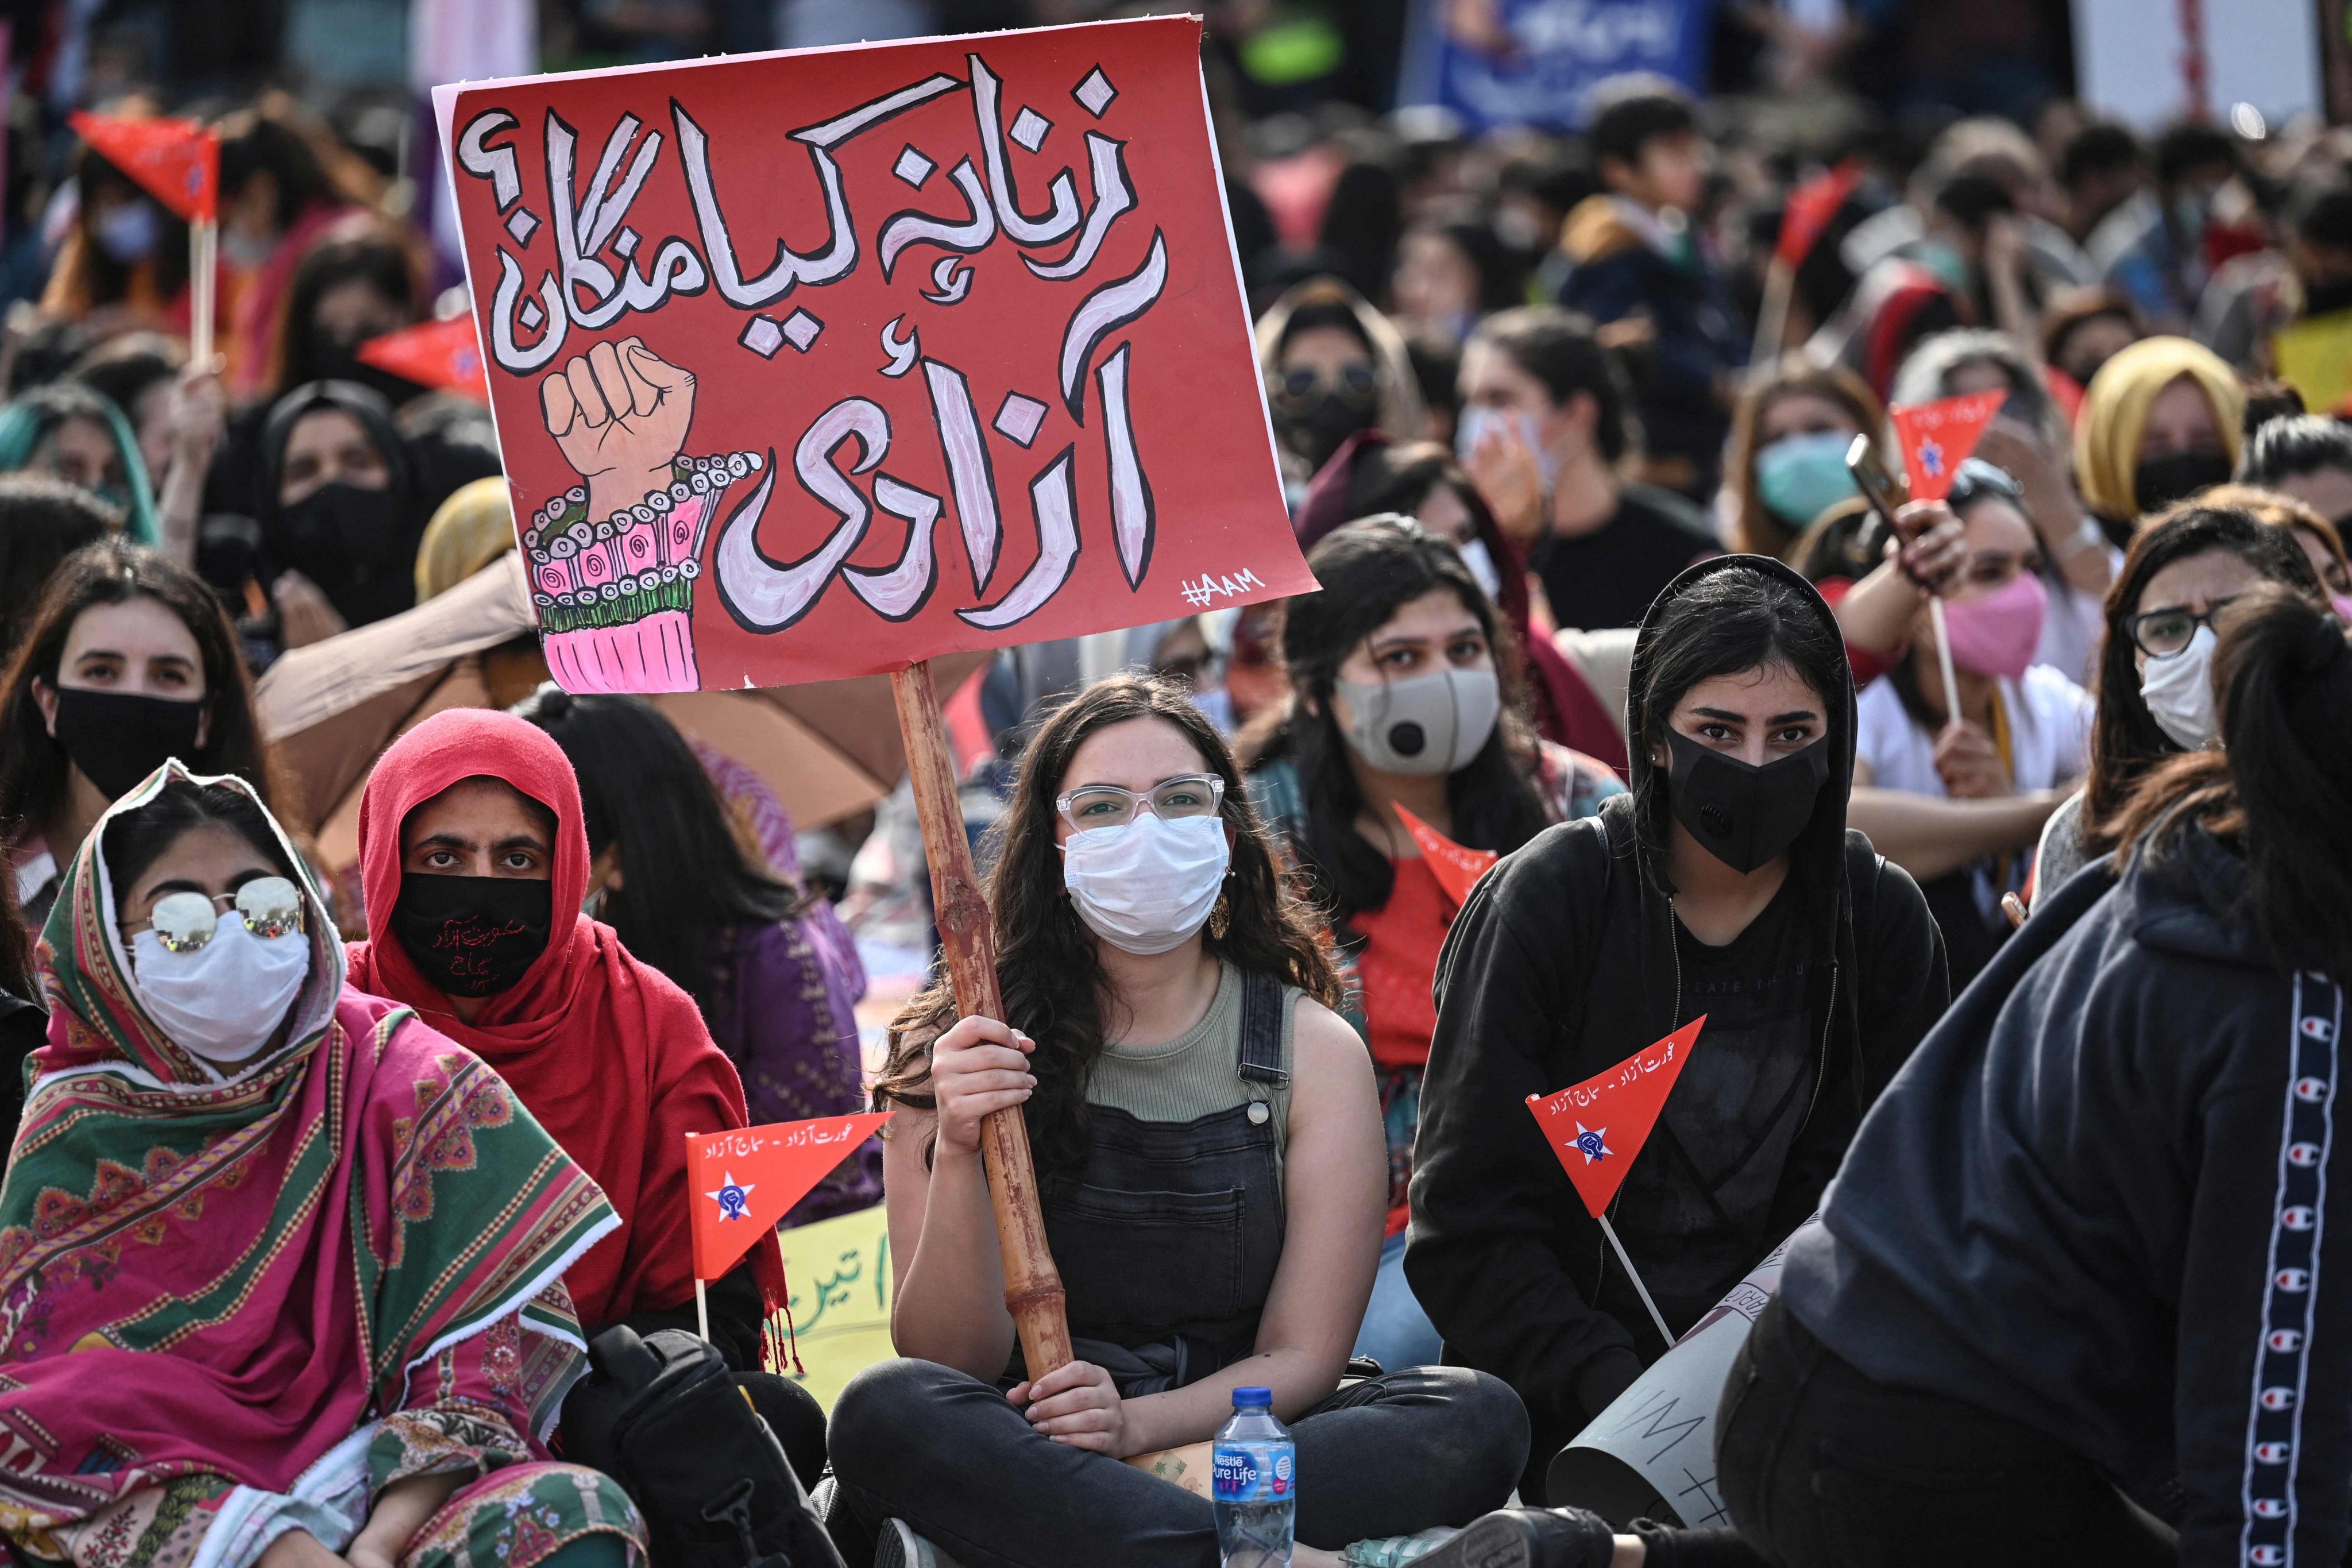 Aurat March activists carry placards during a rally to mark International Women’s Day in Islamabad on March 8, 2021. Photo: AFP 